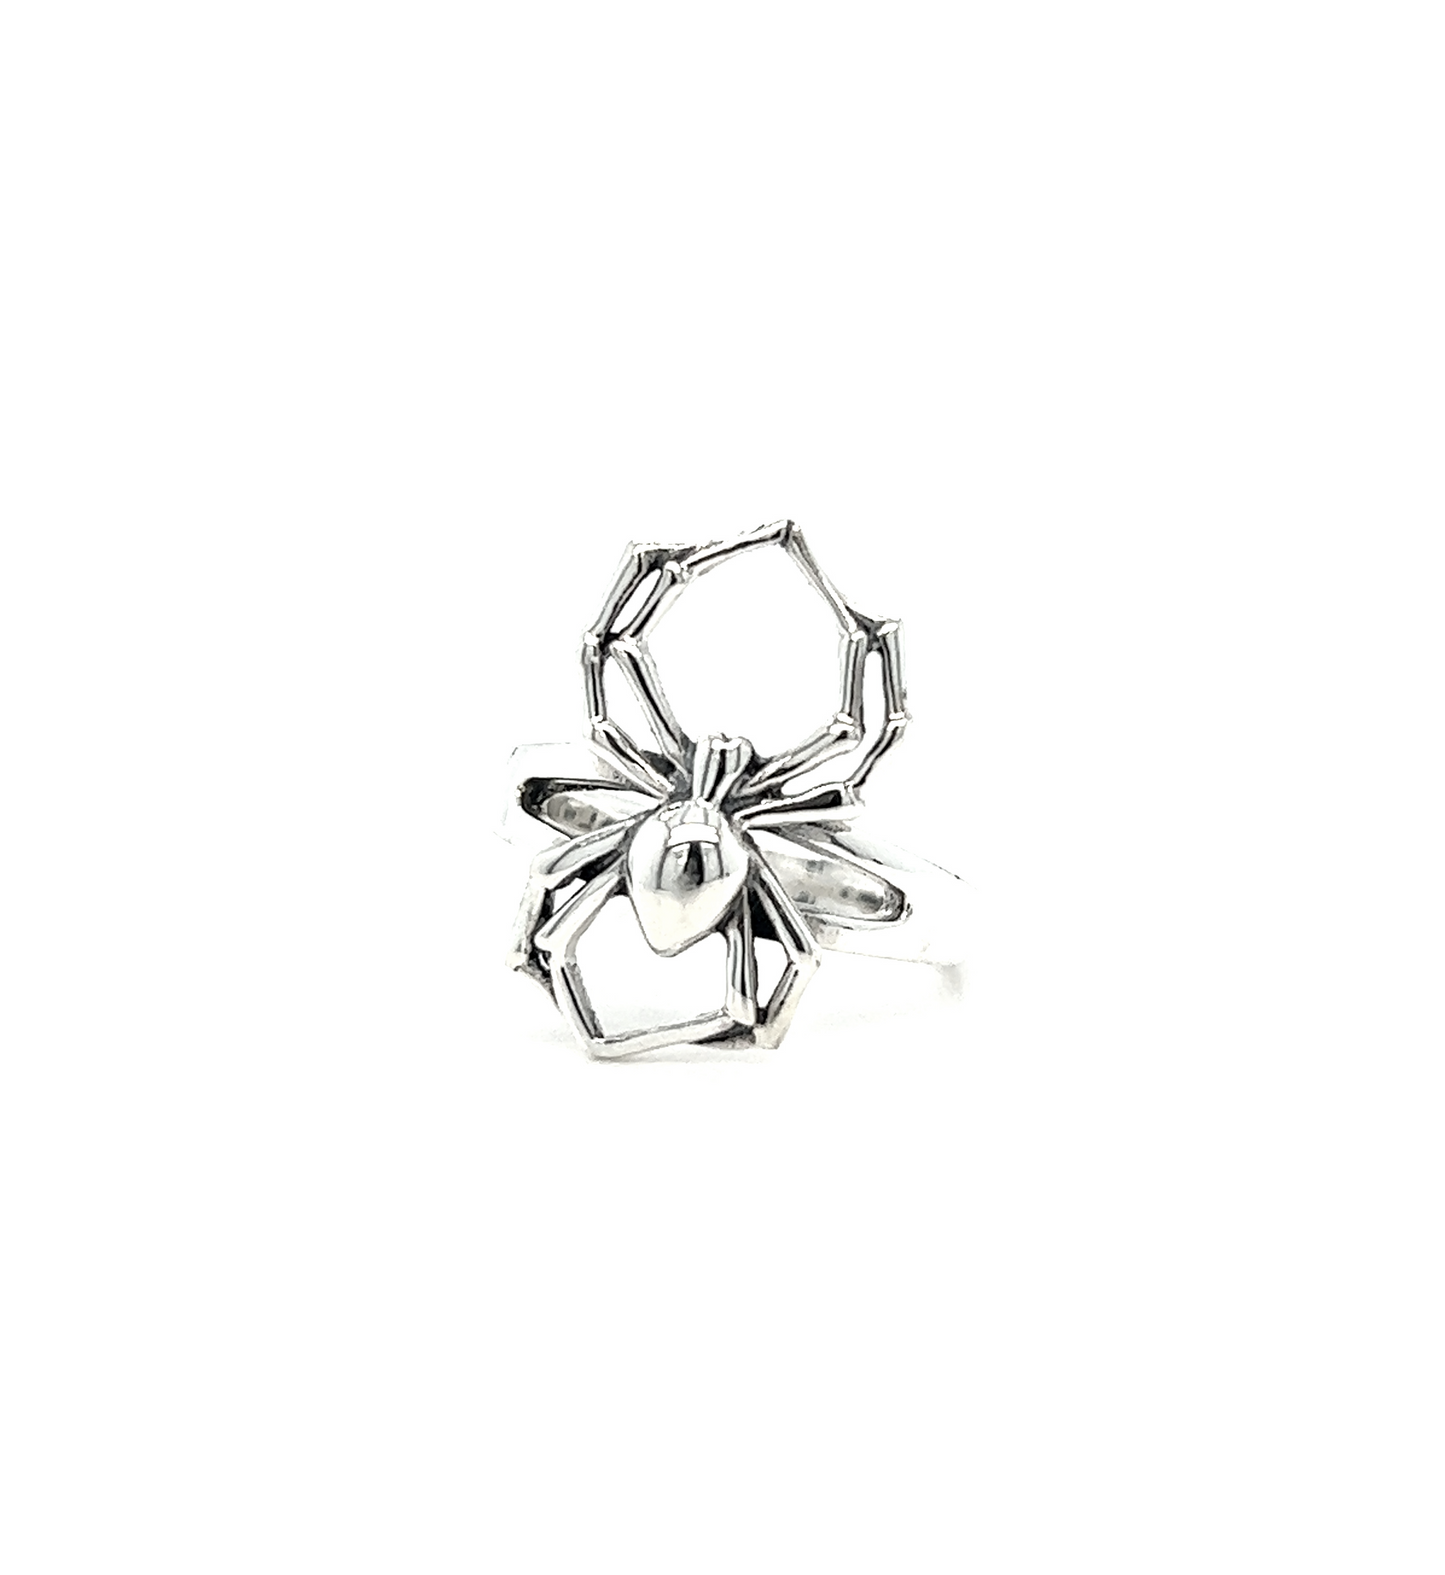 A Spindly Legged Spider Ring on a white background.